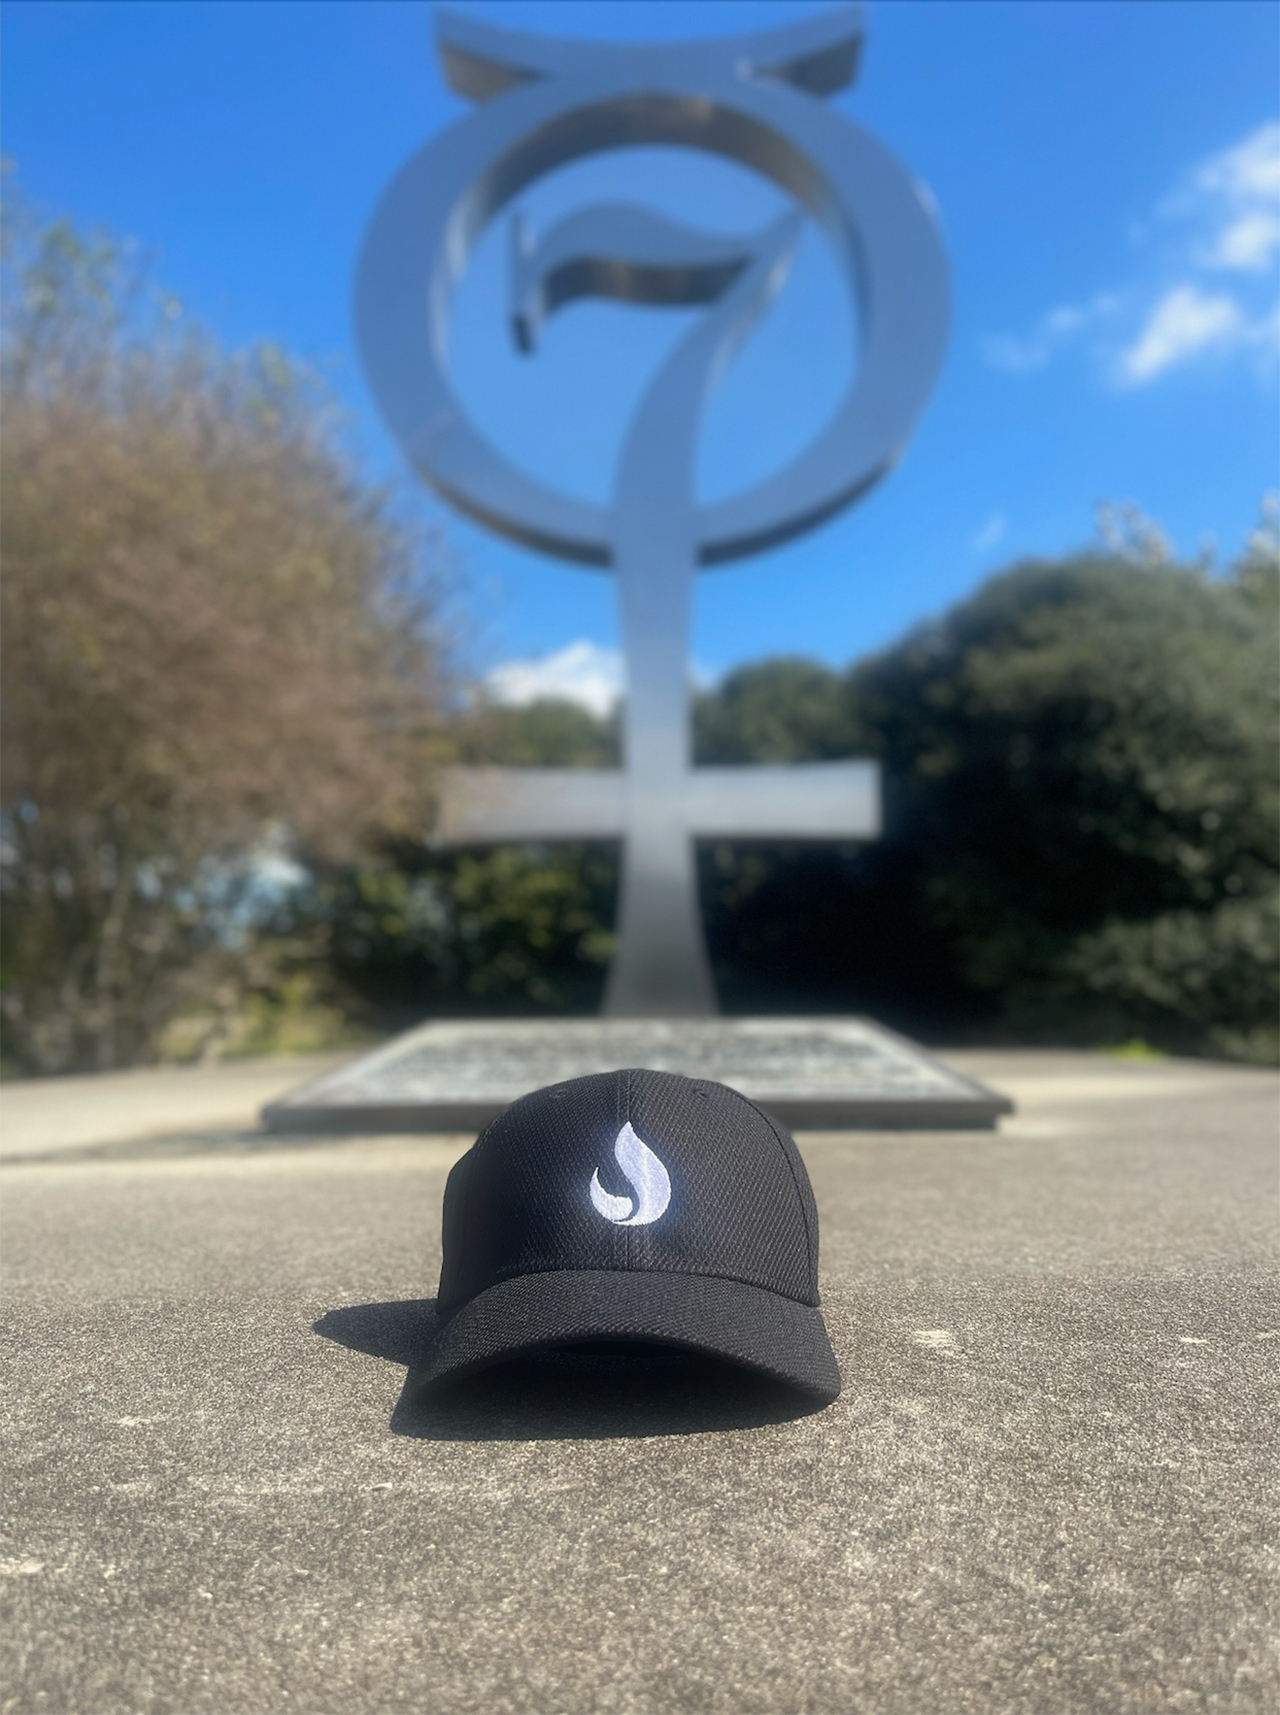 A baseball cap with the Stoke Space logo sits on the ground in front of the Project Mercury sculpture at the entrance to Launch Complex 14 (LC-14) at Cape Canaveral Space Force Station.